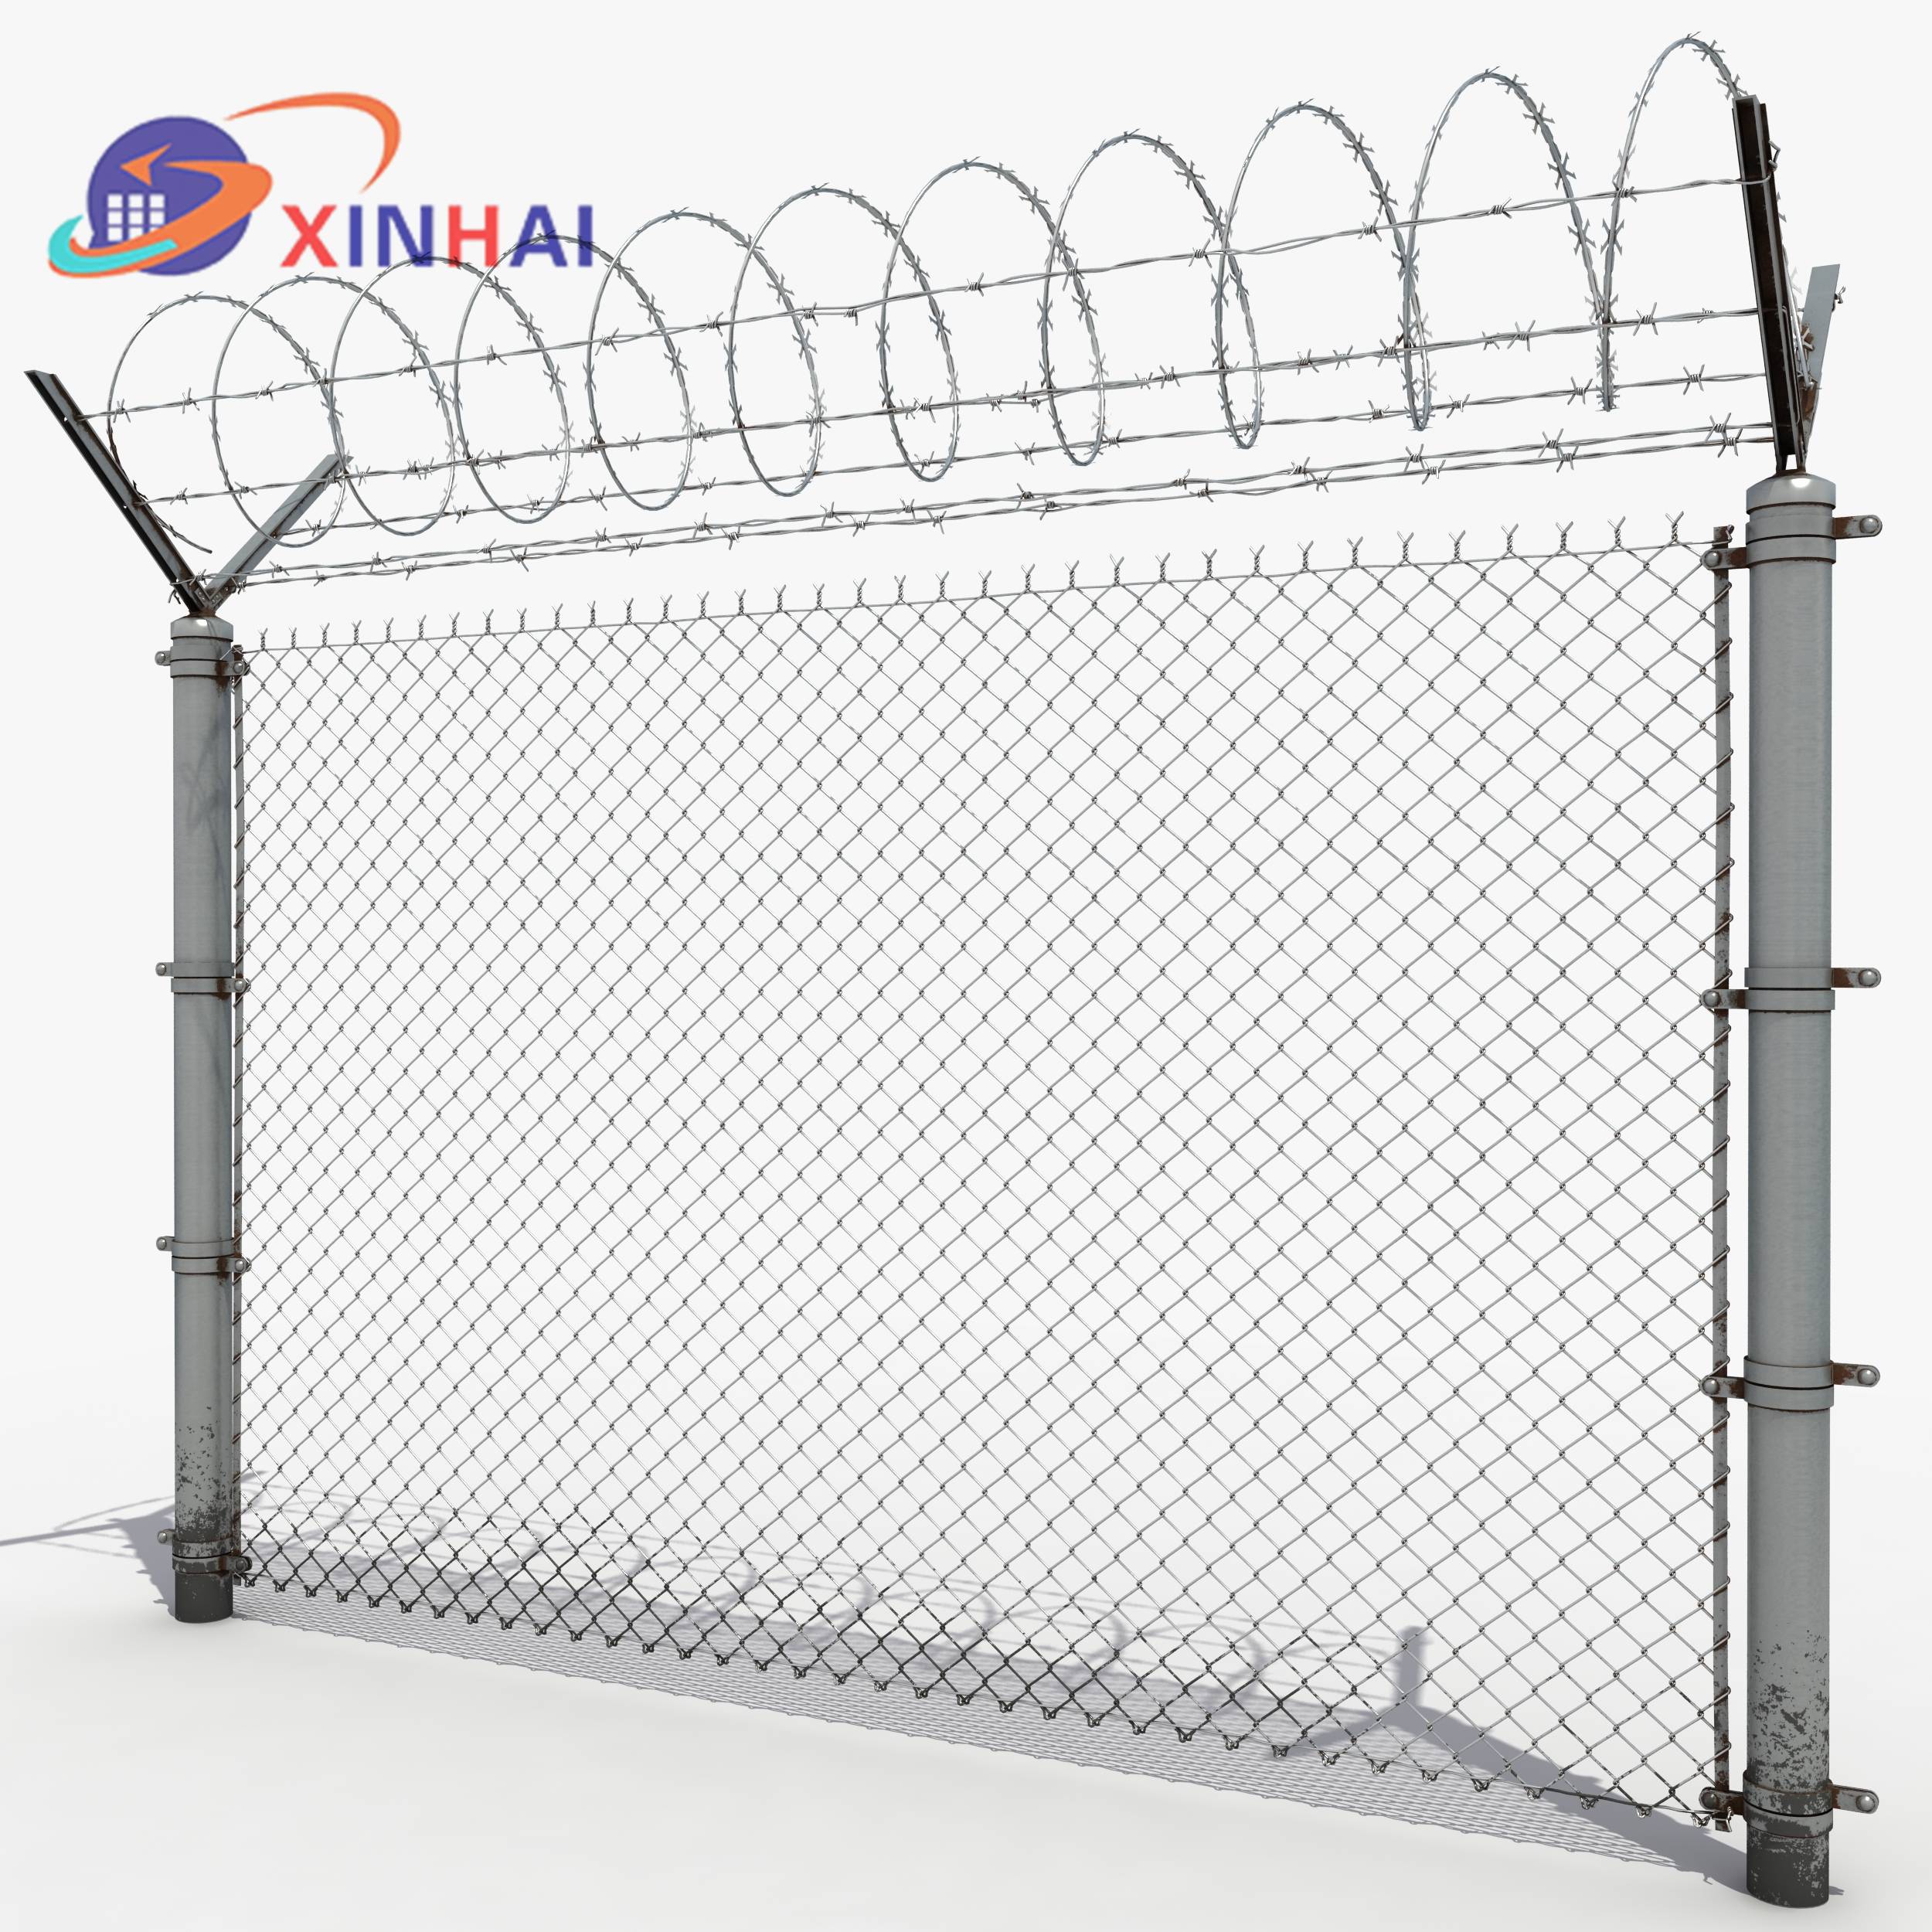 2019 Good Quality Germany Double Wire Panel Fence -
 Airport fence  – Xinhai